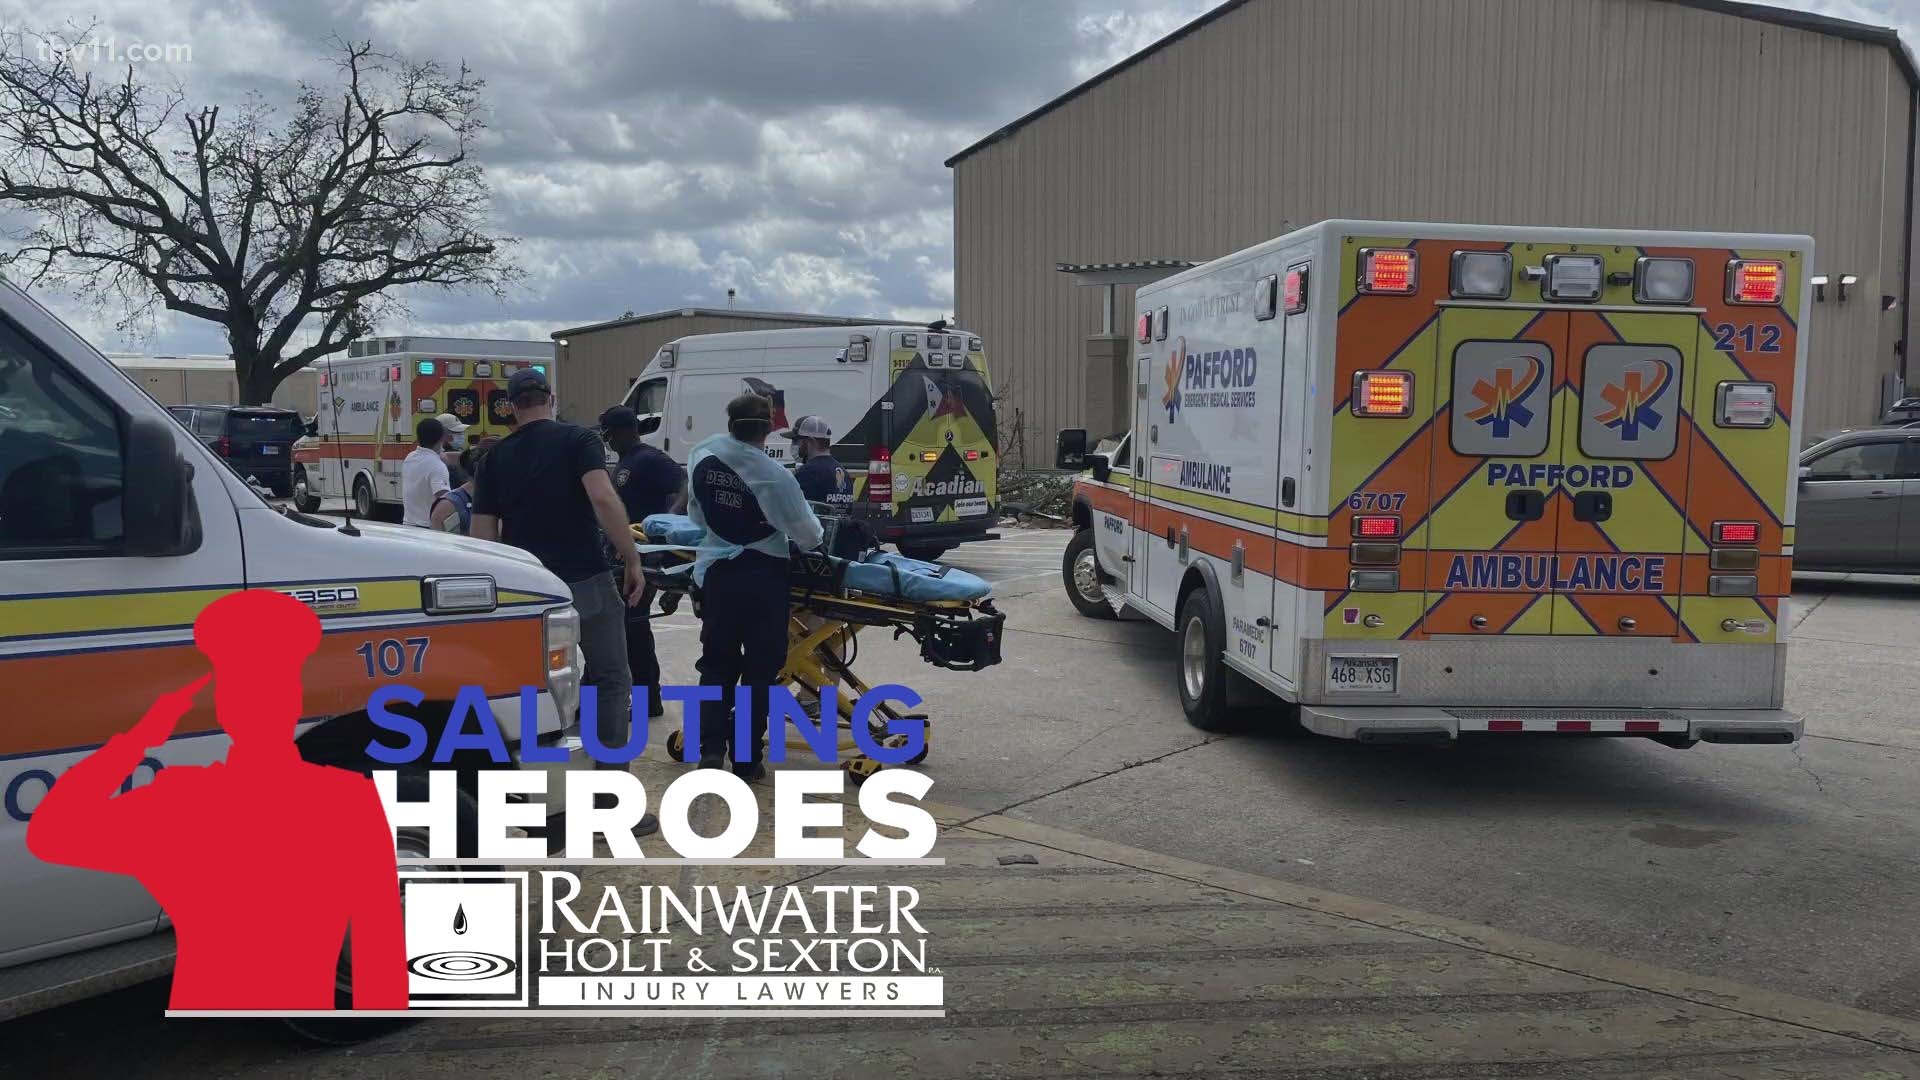 EMTs are oftentimes the ones saving people's lives, now we're taking a look at the heroes who are there to help them cope with the stresses of the job.